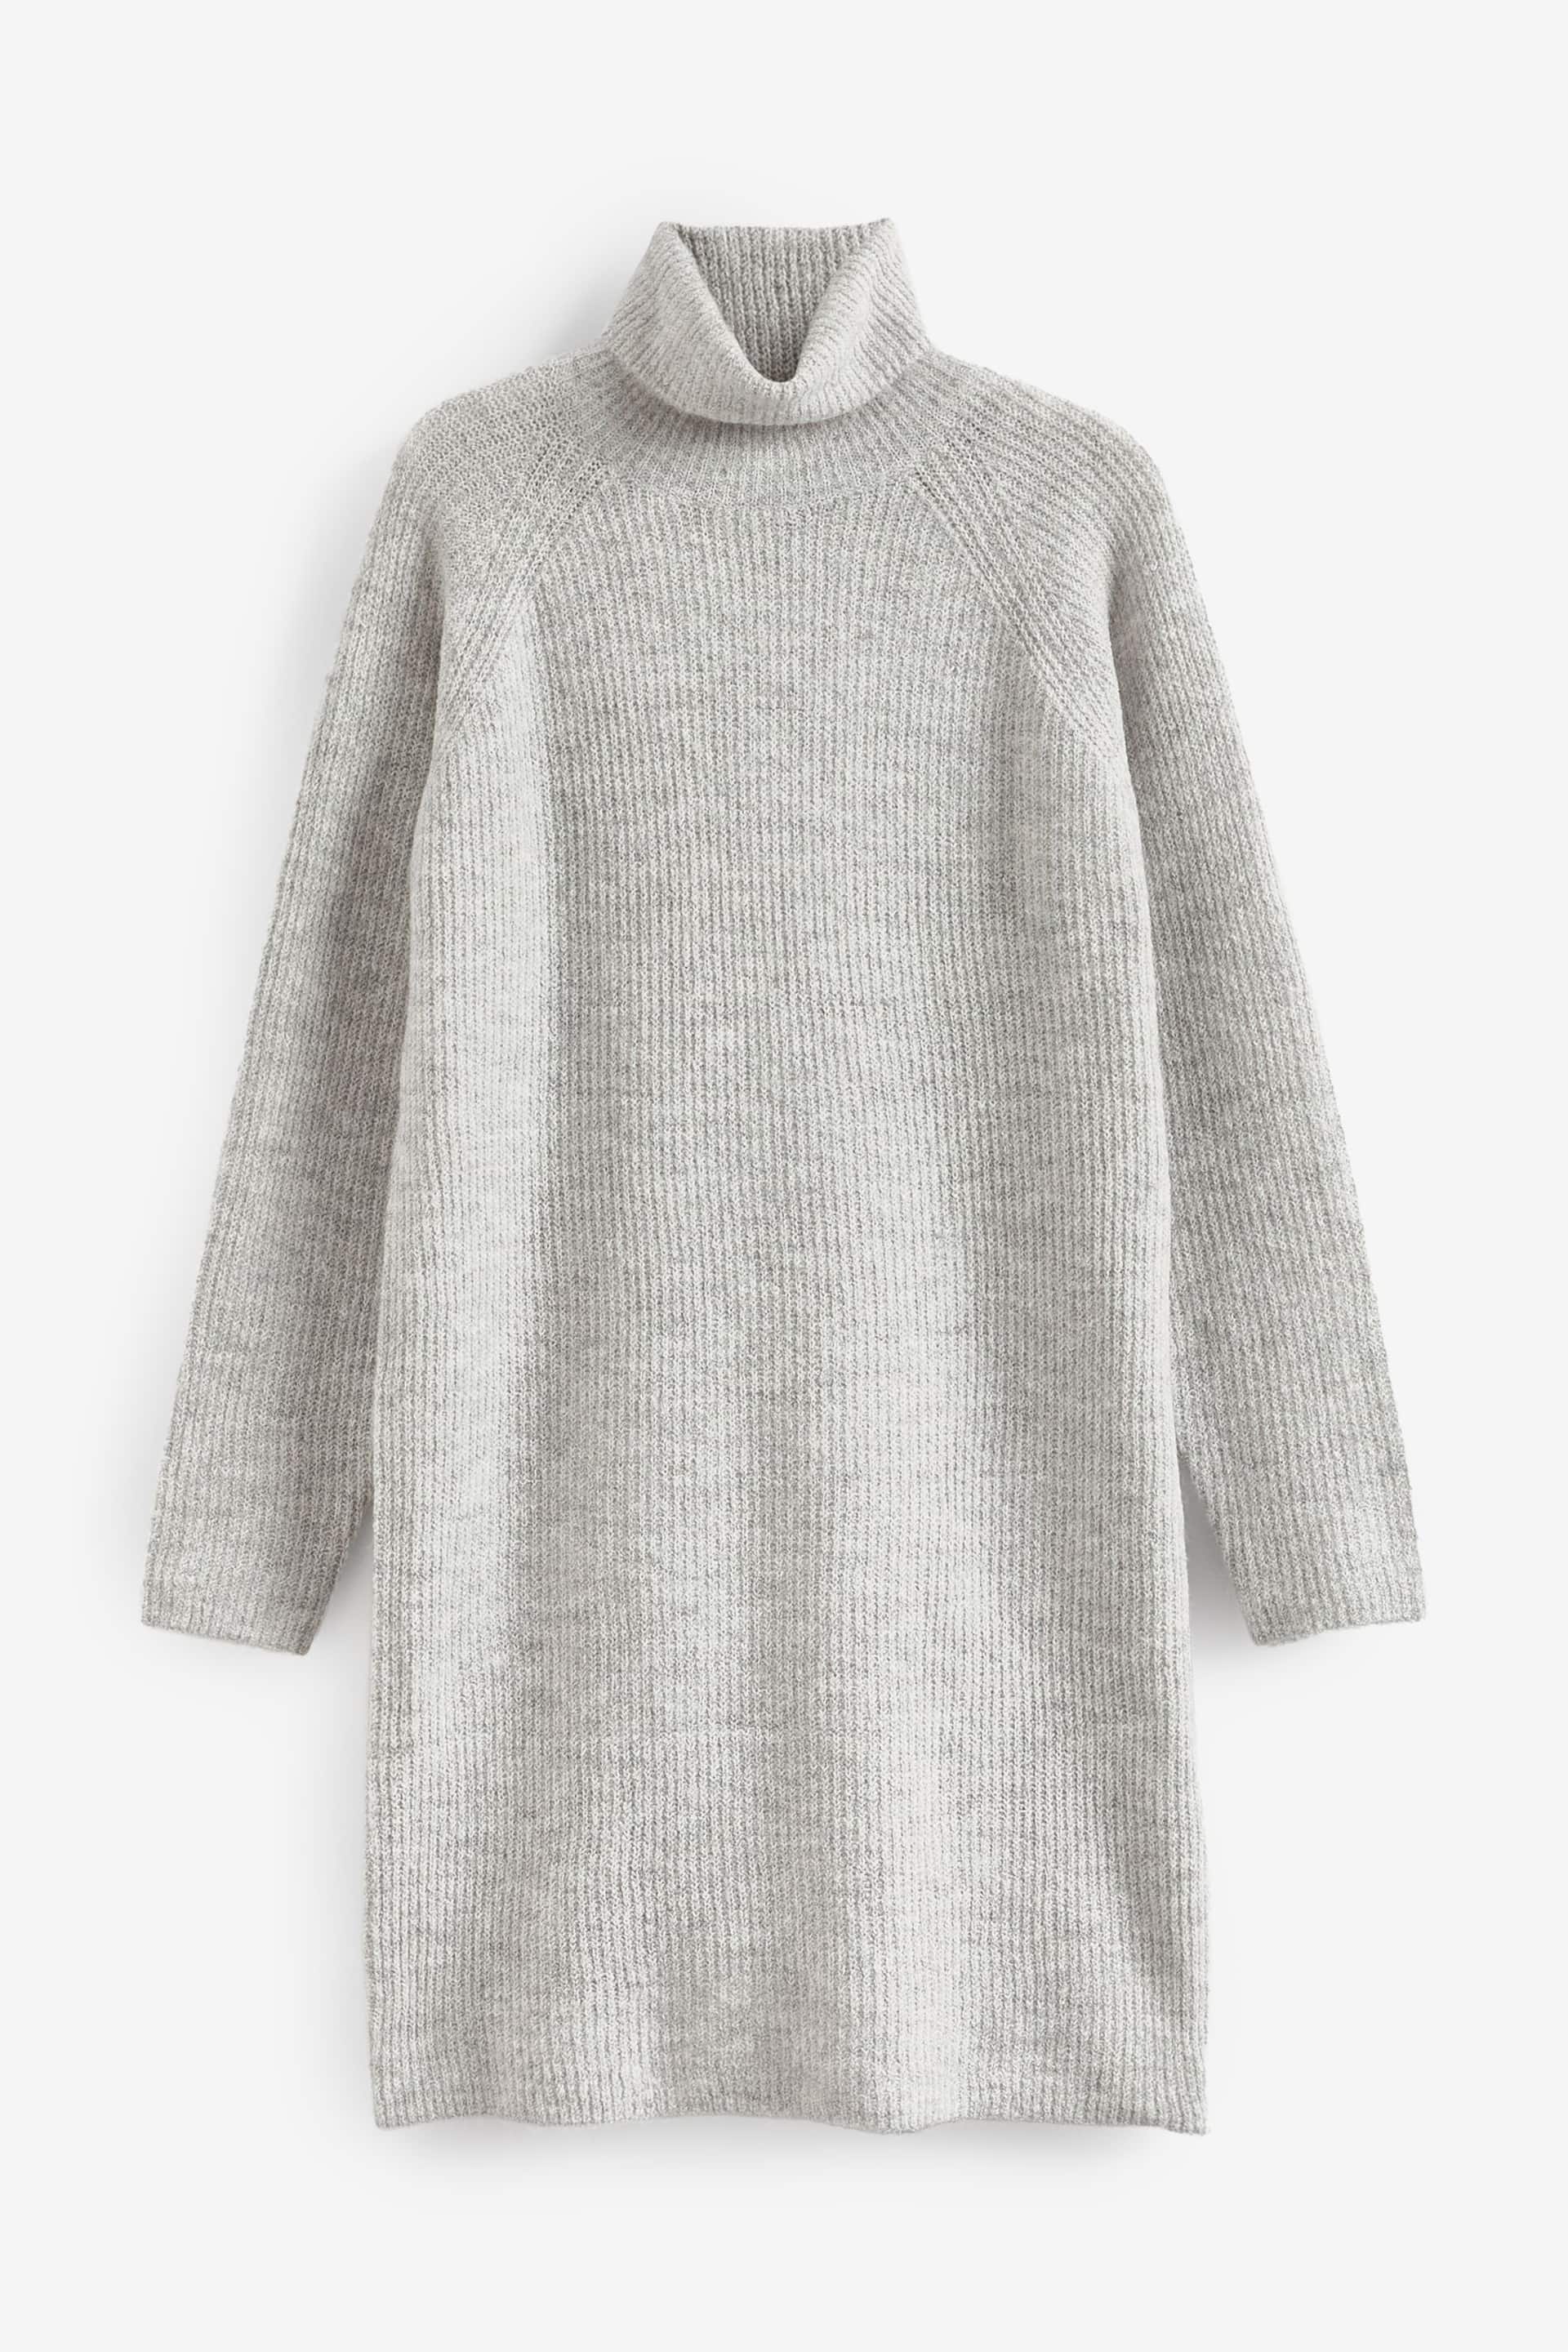 PIECES Grey Roll Neck Knitted Jumper Dress - Image 5 of 5